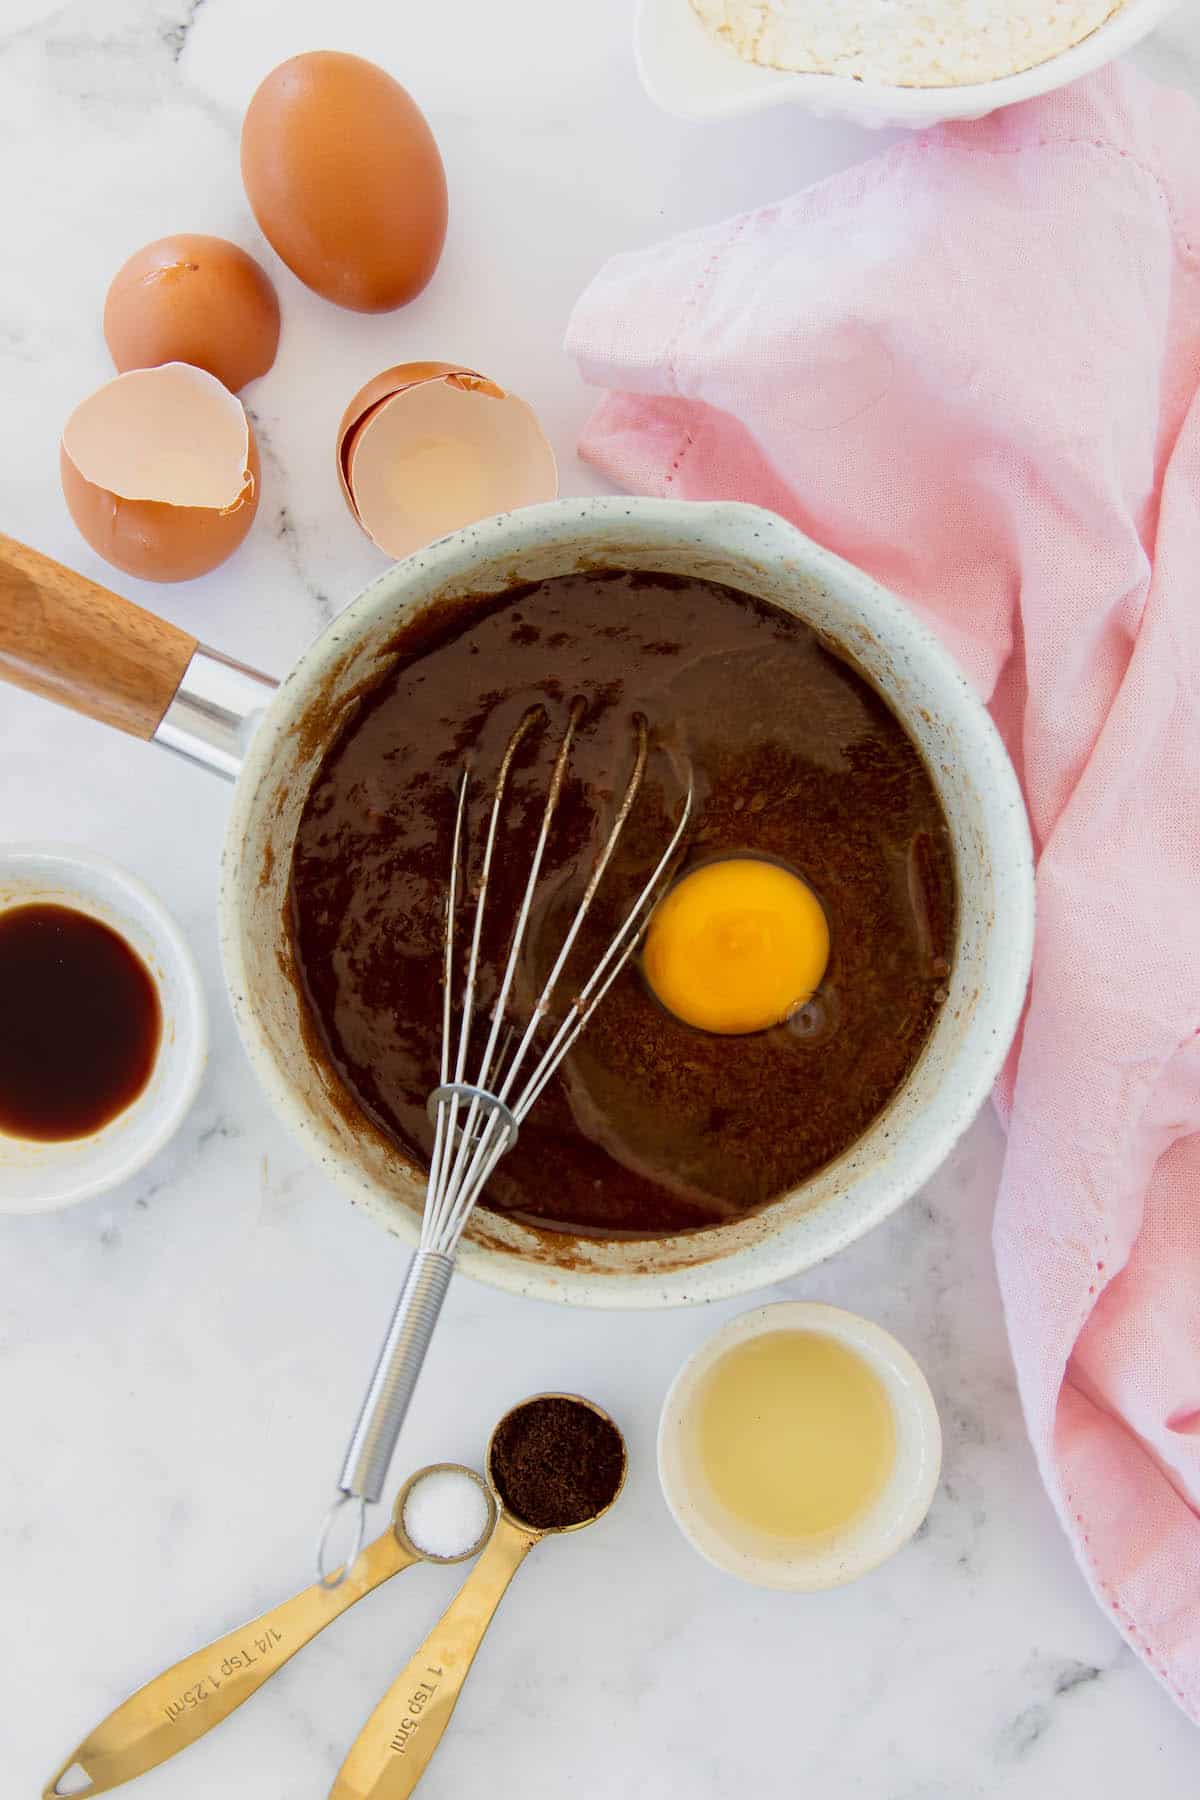 An egg being whisked into melted chocolate